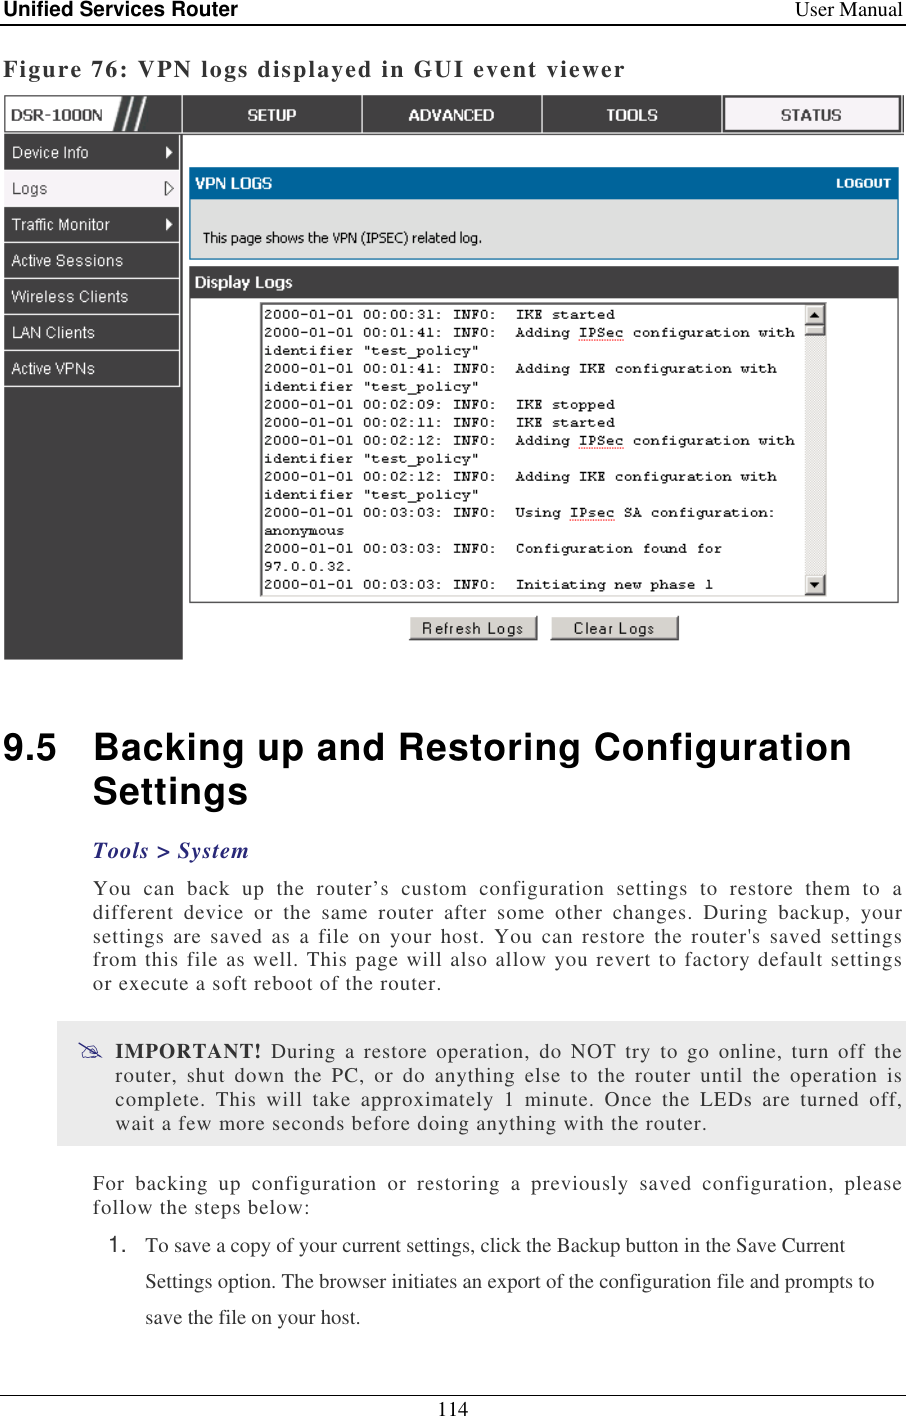 Unified Services Router    User Manual 114  Figure 76: VPN logs displayed in GUI event viewer   9.5  Backing up and Restoring Configuration Settings Tools &gt; System You  can  back  up  the  router’s  custom  configuration  settings  to  restore  them  to  a different  device  or  the  same  router  after  some  other  changes.  During  backup,  your settings  are saved  as  a  file  on  your  host.  You  can  restore  the  router&apos;s  saved  settings from this file as well. This page will also allow you revert to factory default settings or execute a soft reboot of the router.   IMPORTANT!  During  a  restore  operation,  do  NOT  try  to  go  online,  turn  off  the router,  shut  down  the  PC,  or  do  anything  else  to  the  router  until  the  operation  is complete.  This  will  take  approximately  1  minute.  Once  the  LEDs  are  turned  off, wait a few more seconds before doing anything with the router. For  backing  up  configuration  or  restoring  a  previously  saved  configuration,  please follow the steps below: 1.  To save a copy of your current settings, click the Backup button in the Save Current Settings option. The browser initiates an export of the configuration file and prompts to save the file on your host. 